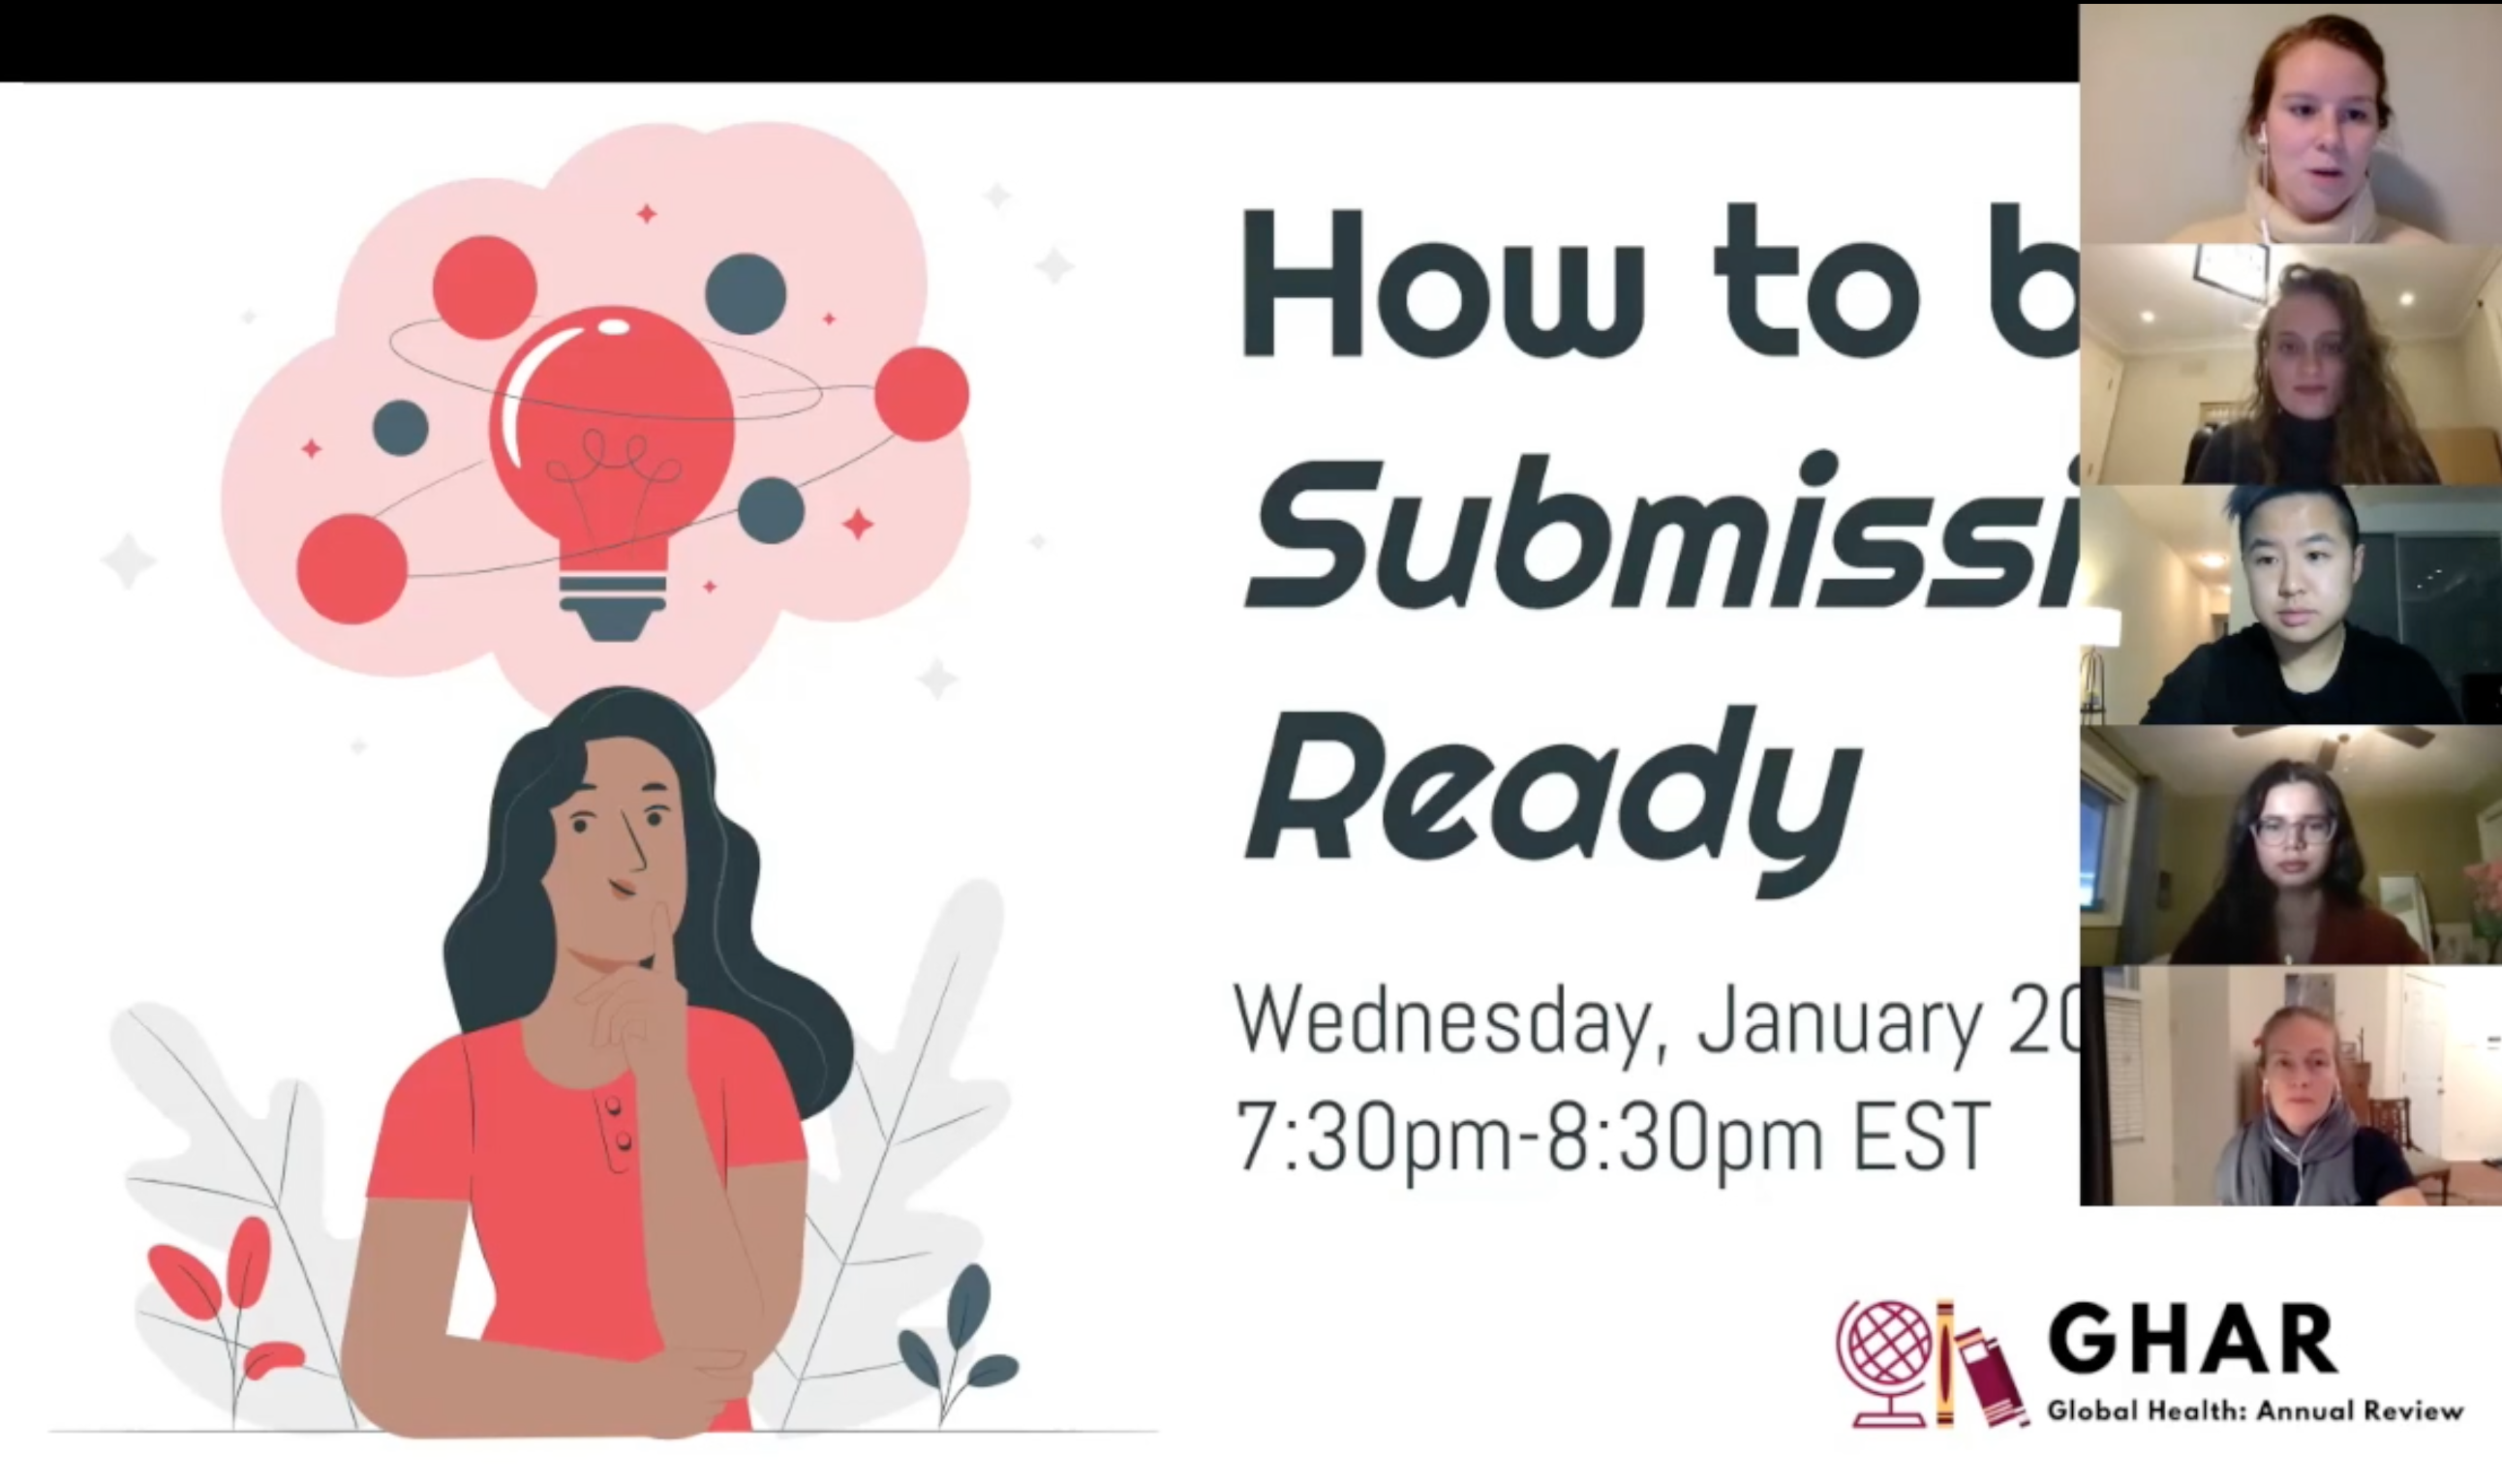 Workshop #2: How to be Submission Ready